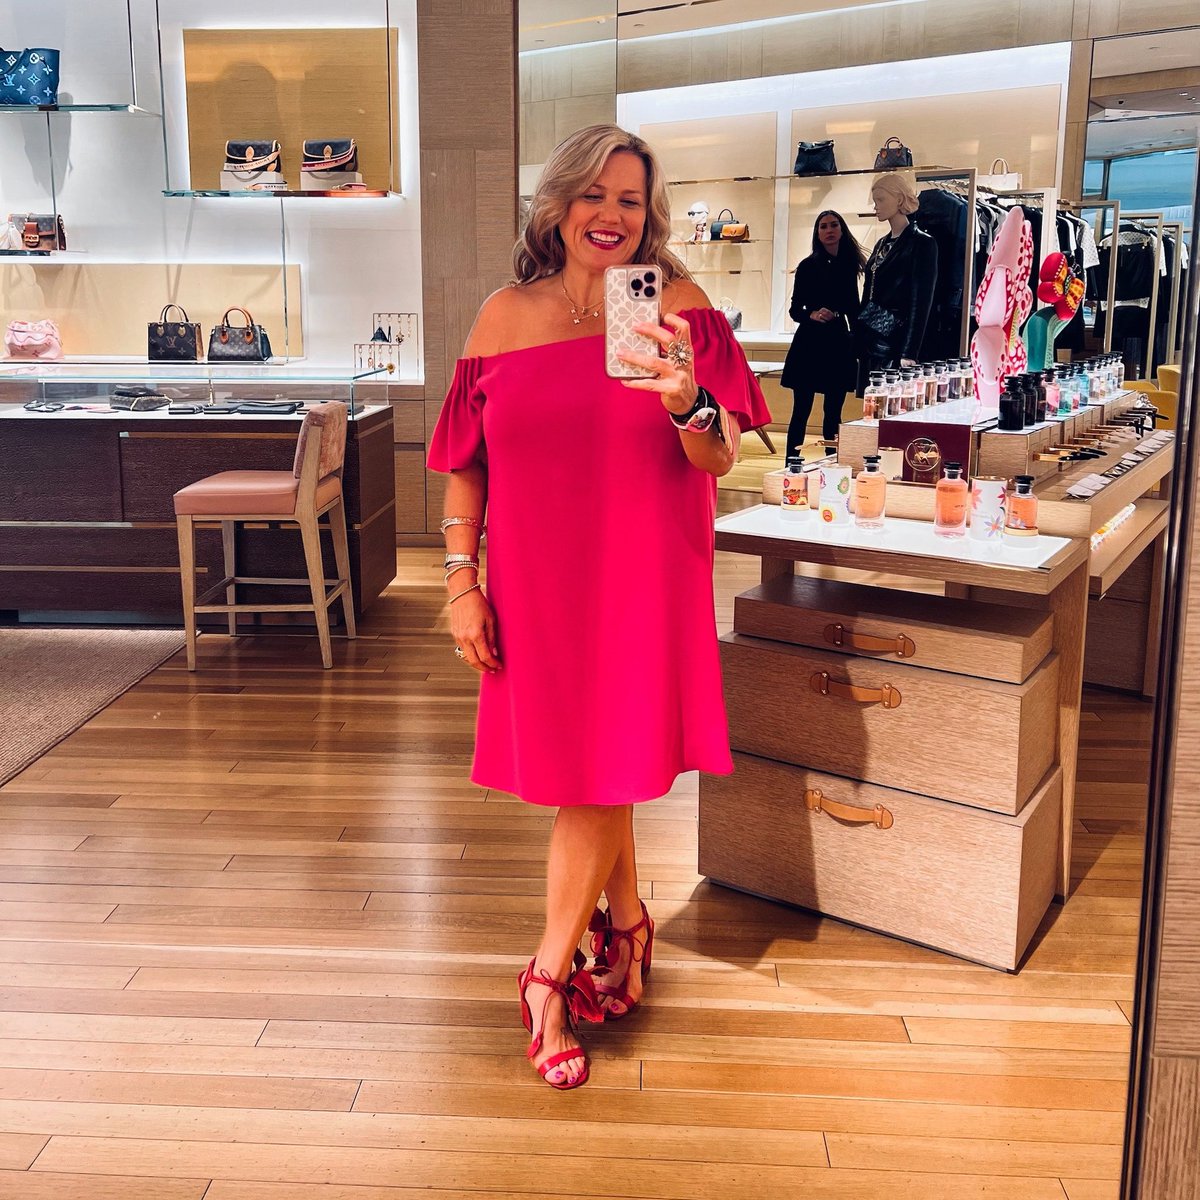 Hosting a private event in partnership with Louis Vuitton was such a wonderful opportunity to share our Luxury Mindset research. 

We shared champagne, and the team could shop privately with some of my fave associates of the House.

#LuxuryLover #LuxuryIsaMindset #LiveLuxe